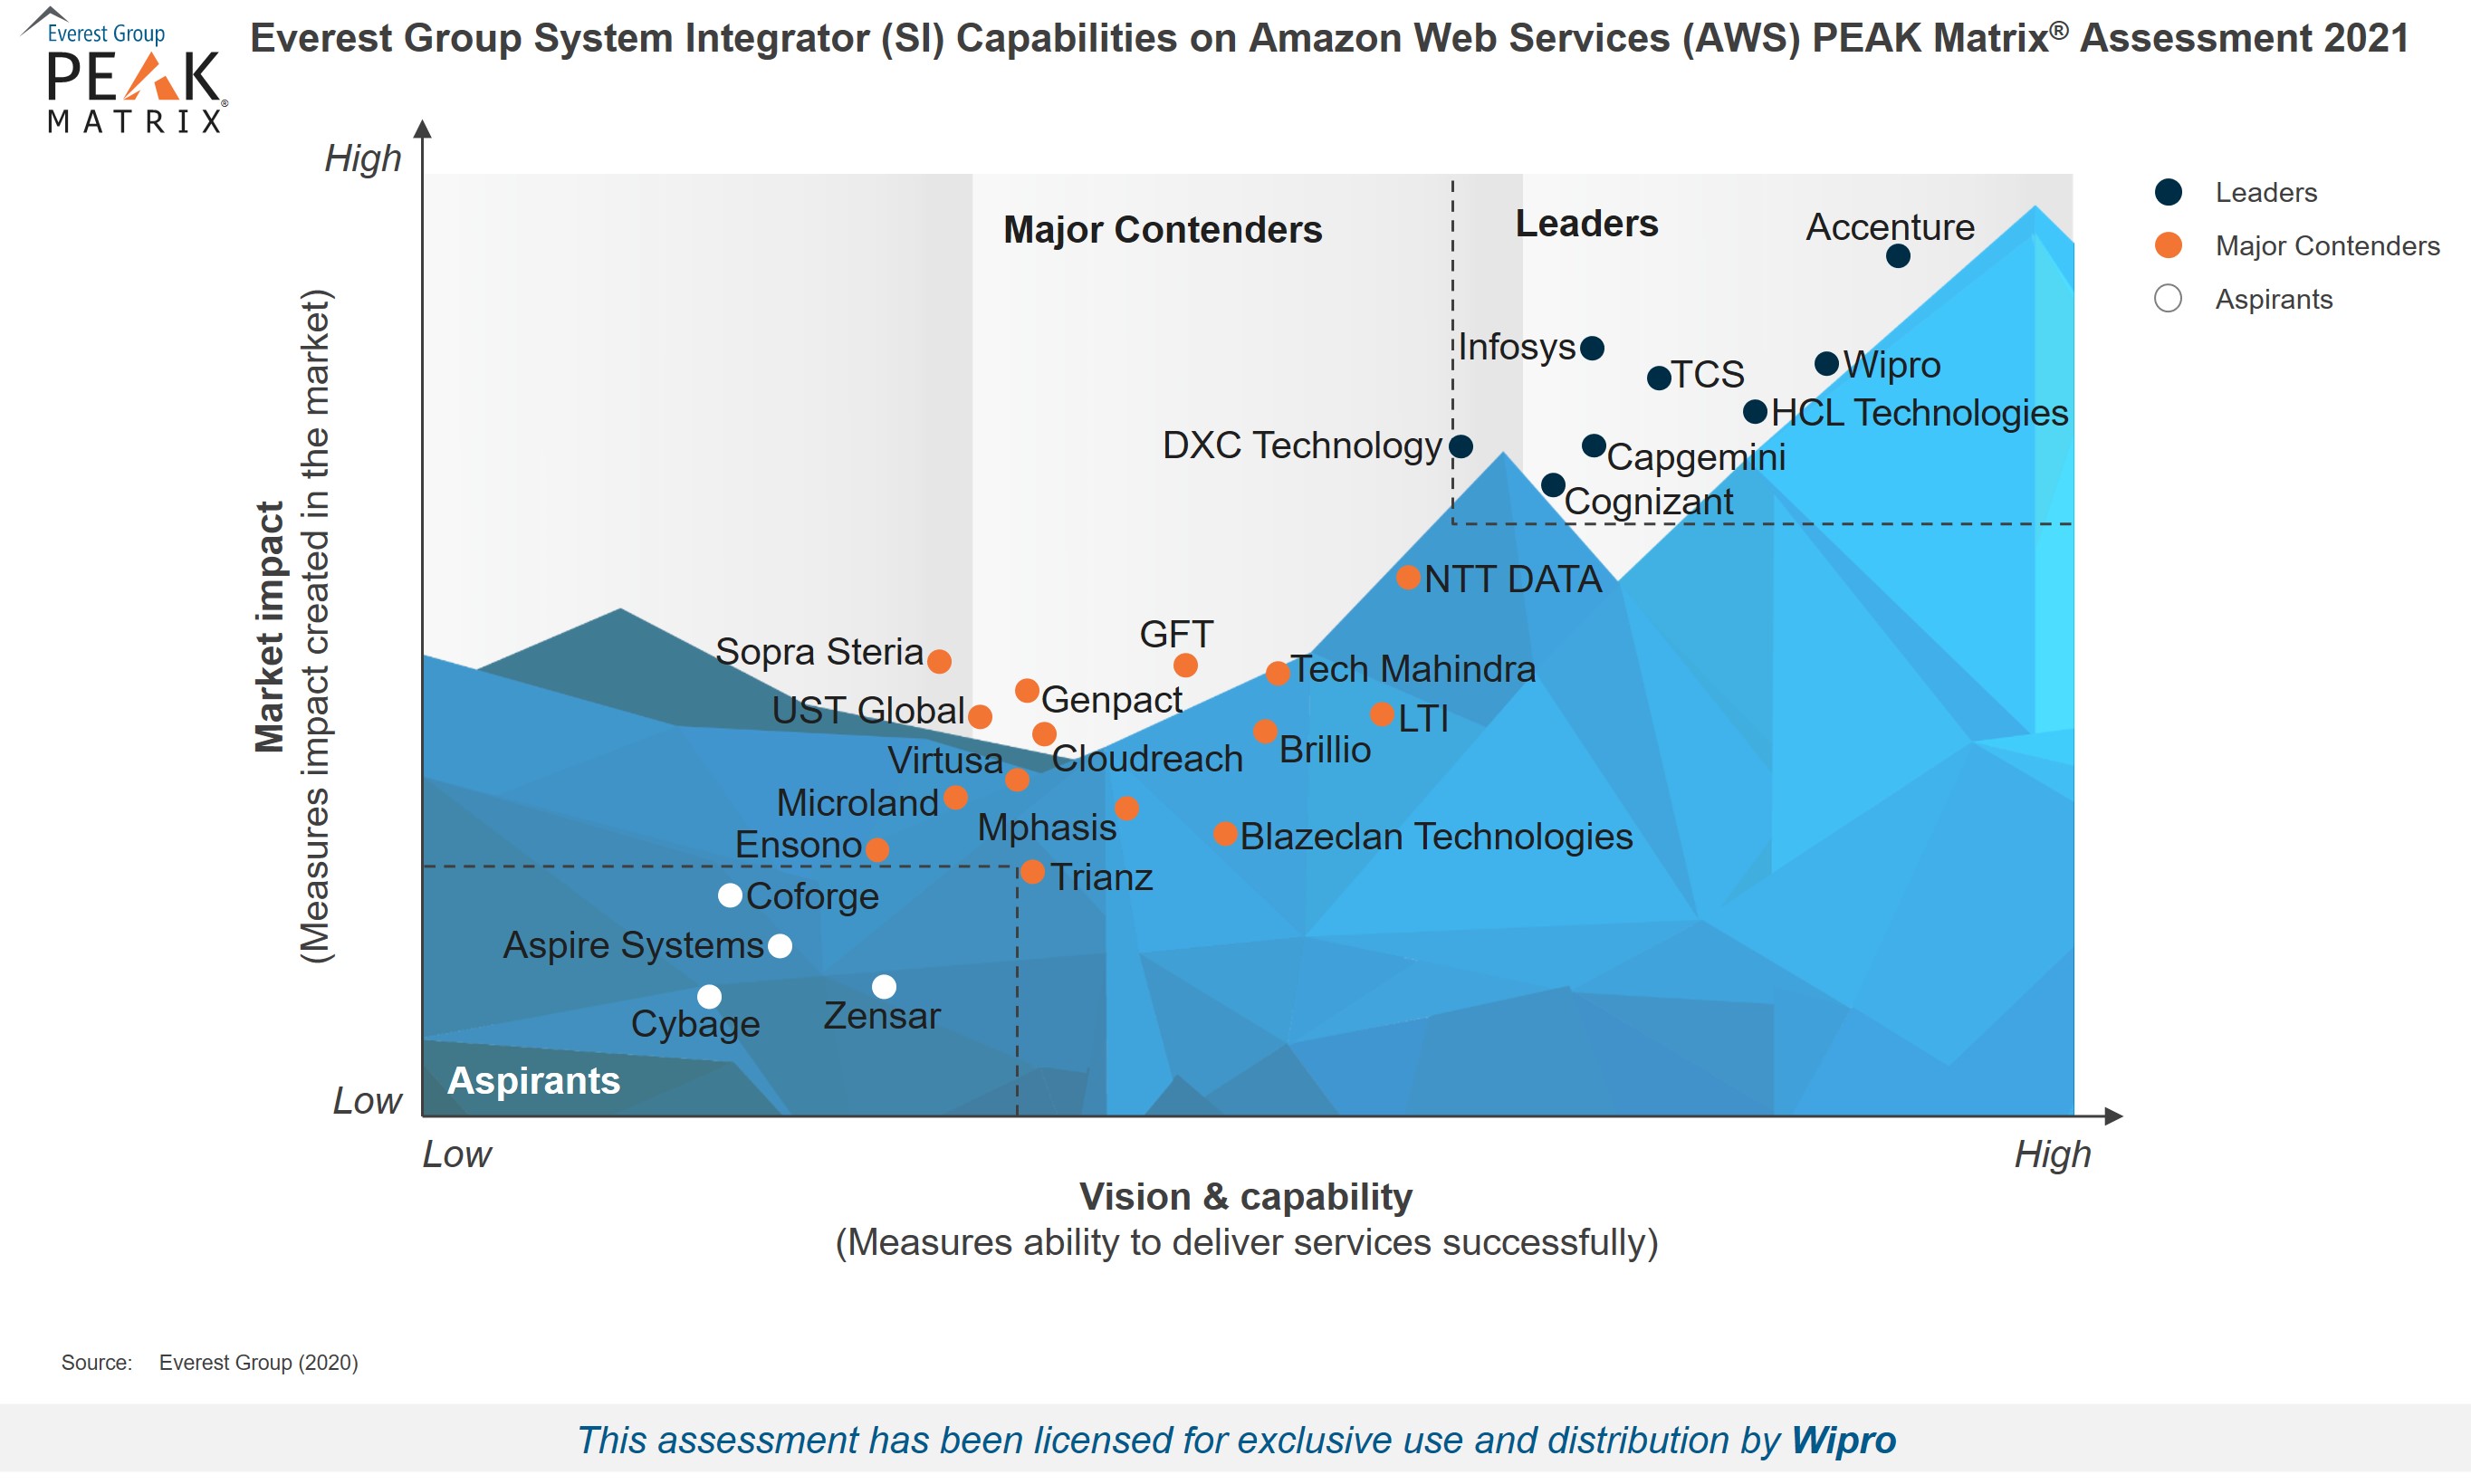 Wipro positioned as Leader in System Integrator (SI) Capabilities on Amazon Web Services (AWS) PEAK Matrix® Assessment 2021